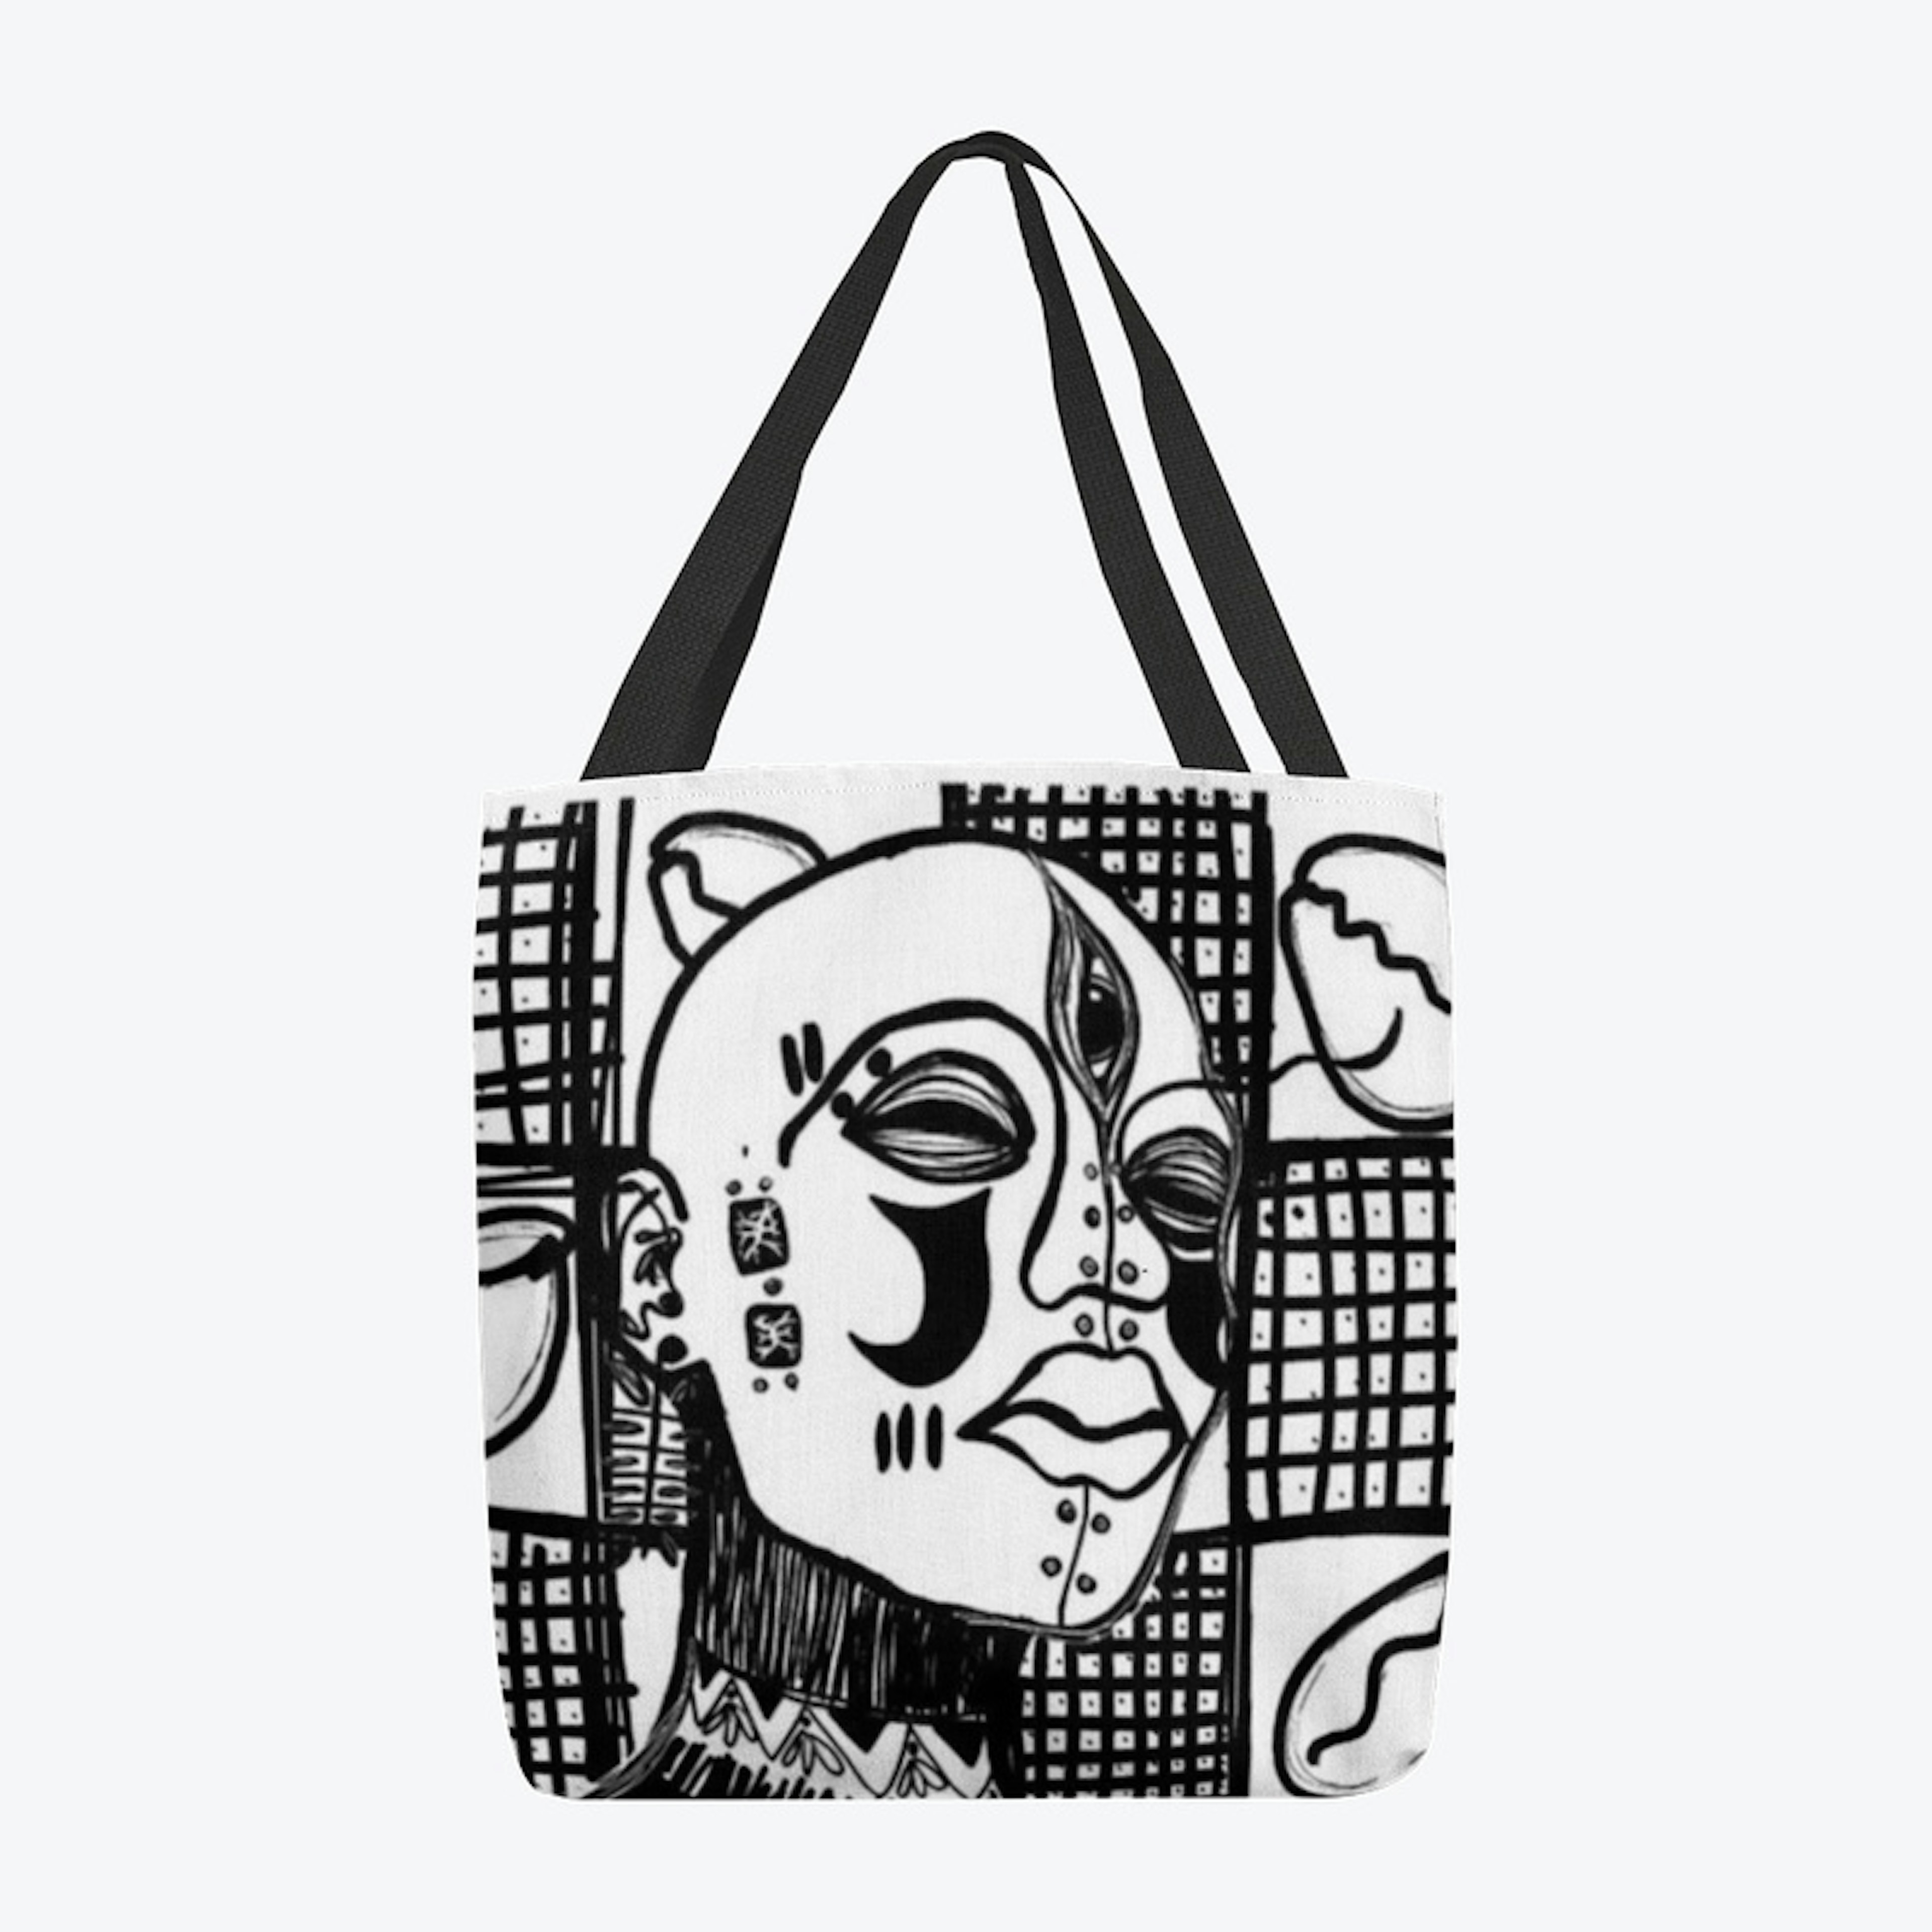 OUR TOTE BAG